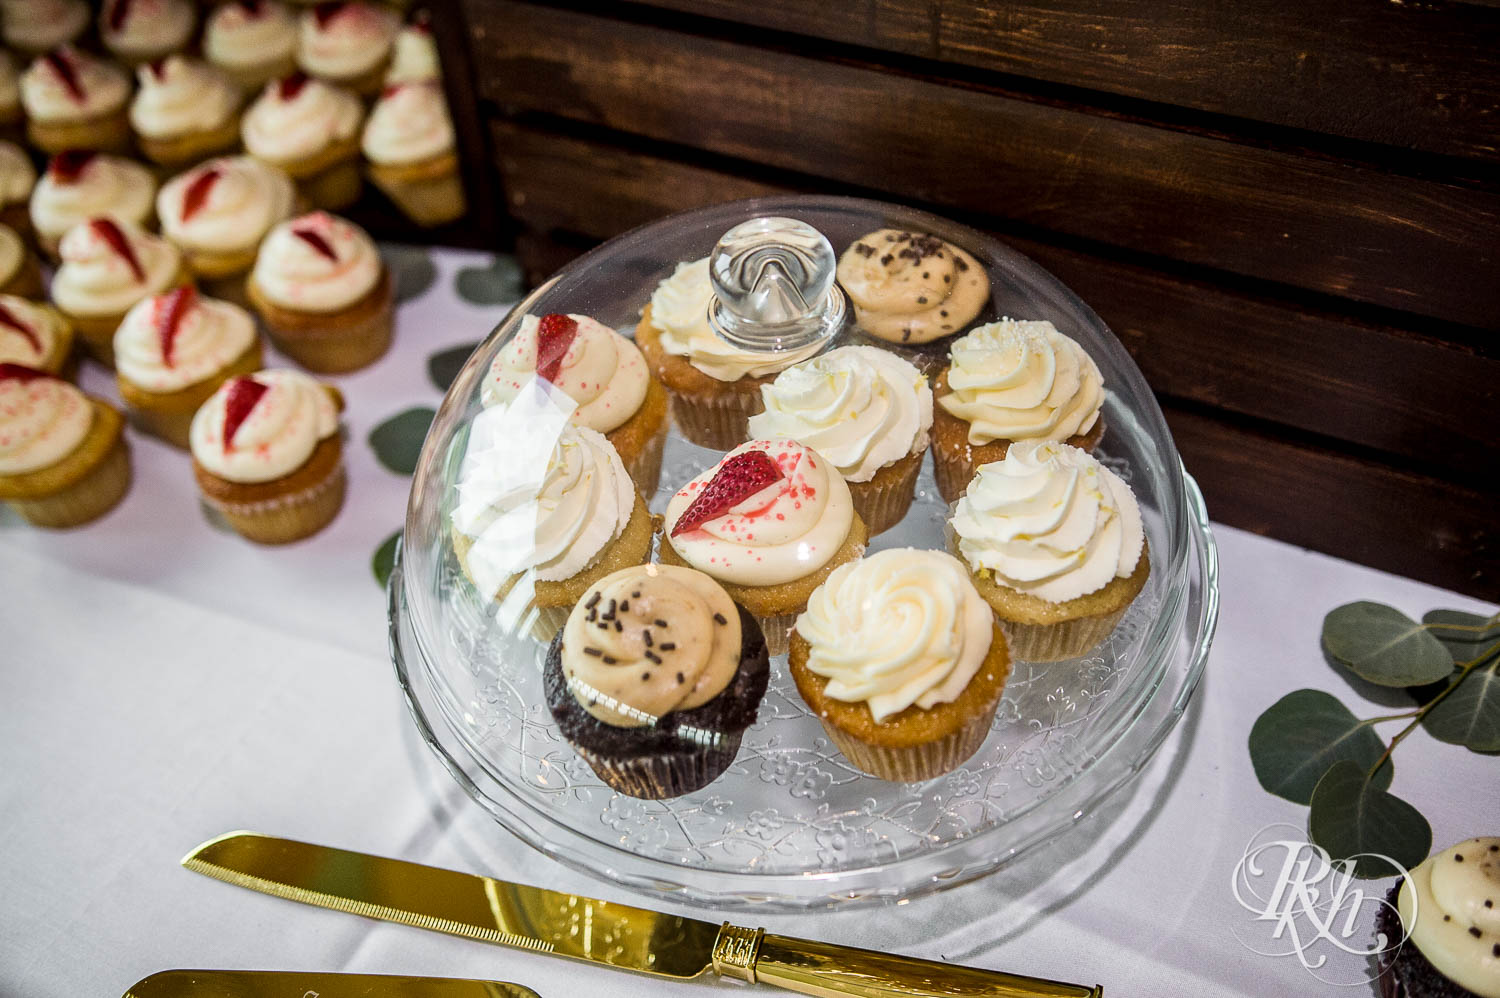 Wedding cupcakes at Plymouth Creek Center in Plymouth, Minnesota.